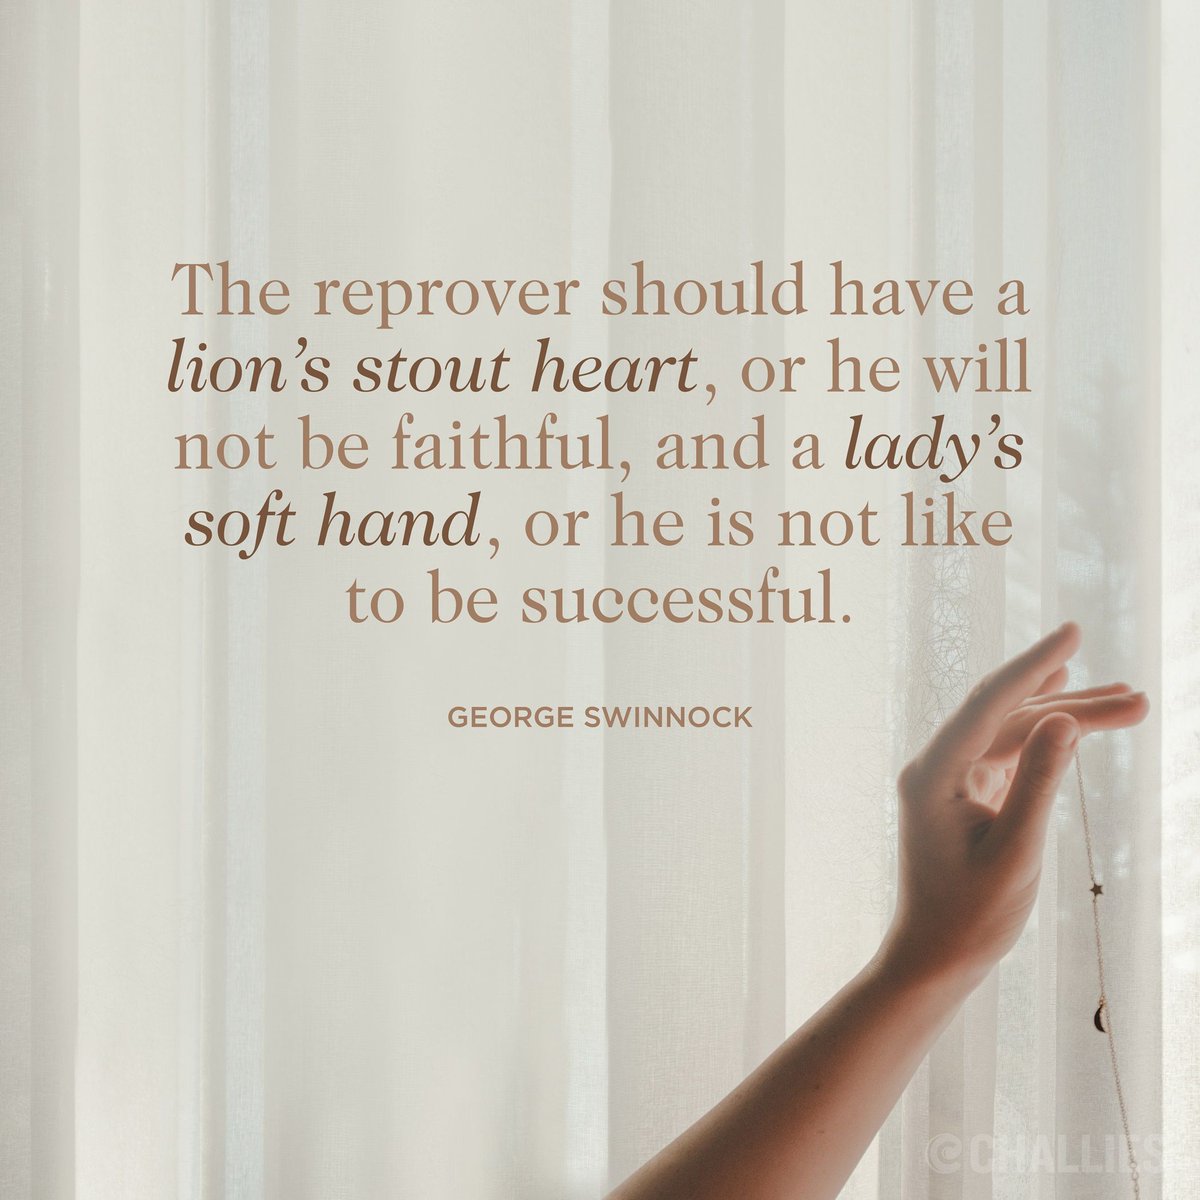 'The reprover should have a lion’s stout heart, or he will not be faithful, and a lady’s soft hand, or he is not like to be successful.' (George Swinnock)